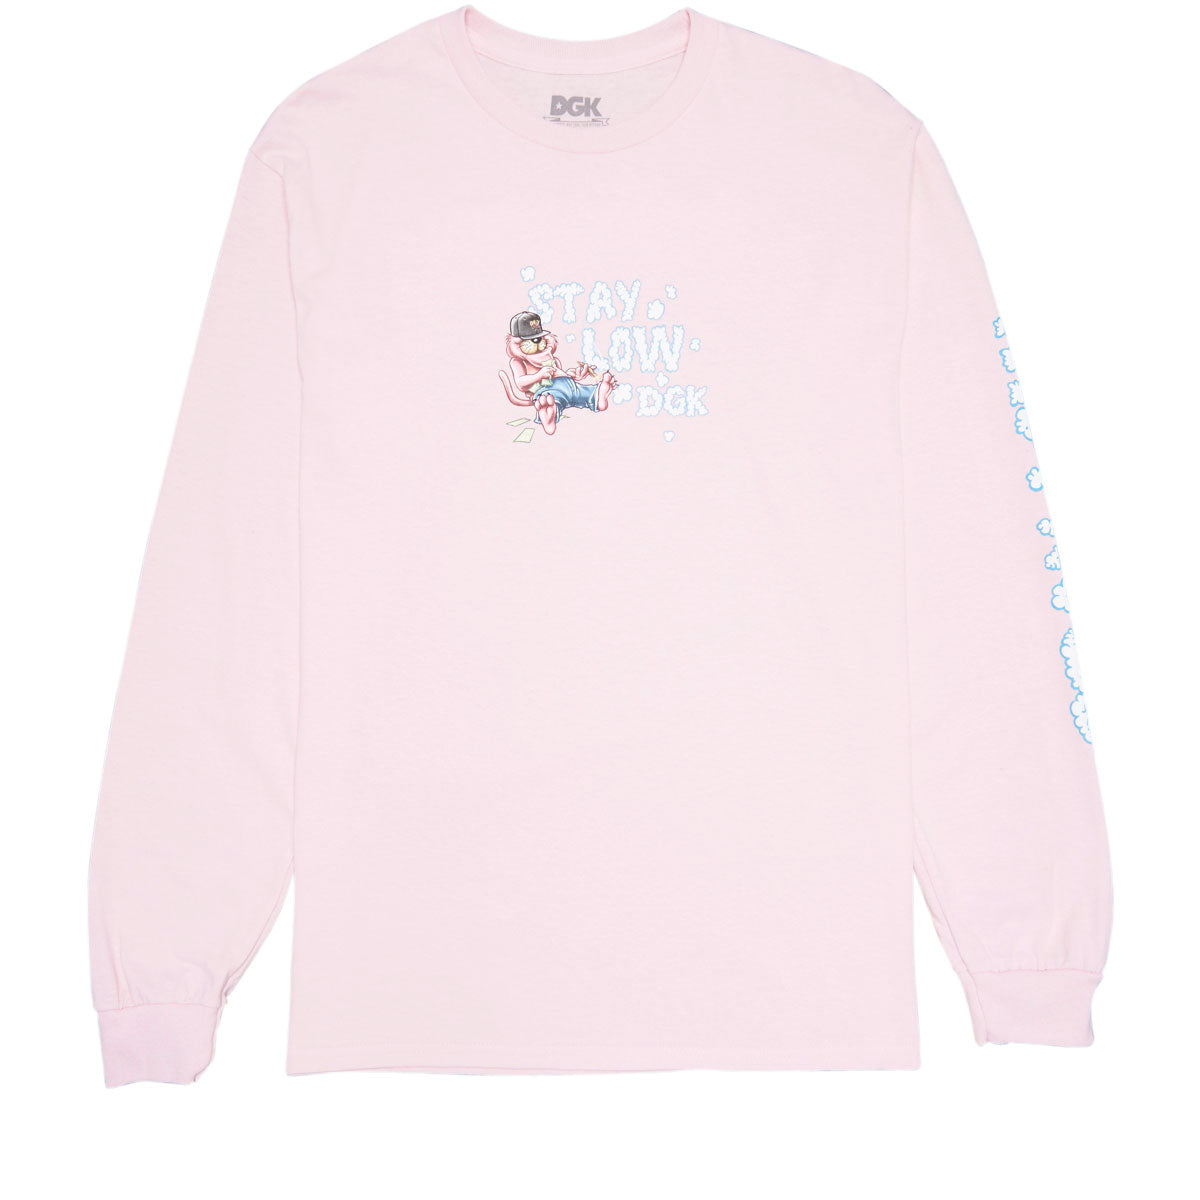 DGK Stay Low Long Sleeve T-Shirt - Pink image 2